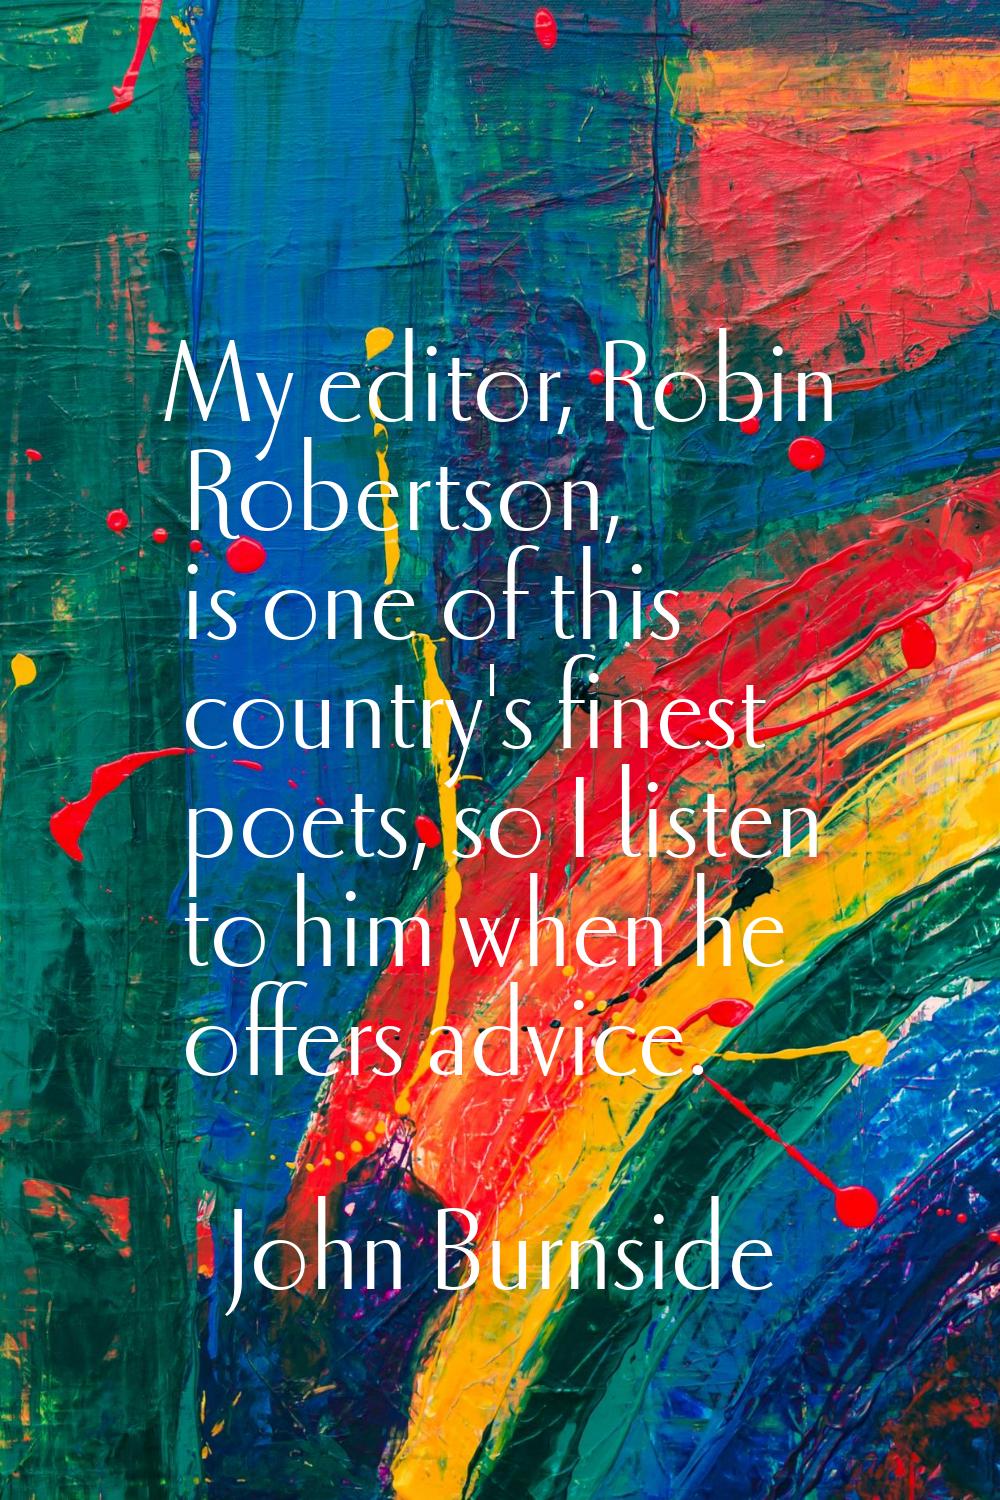 My editor, Robin Robertson, is one of this country's finest poets, so I listen to him when he offer